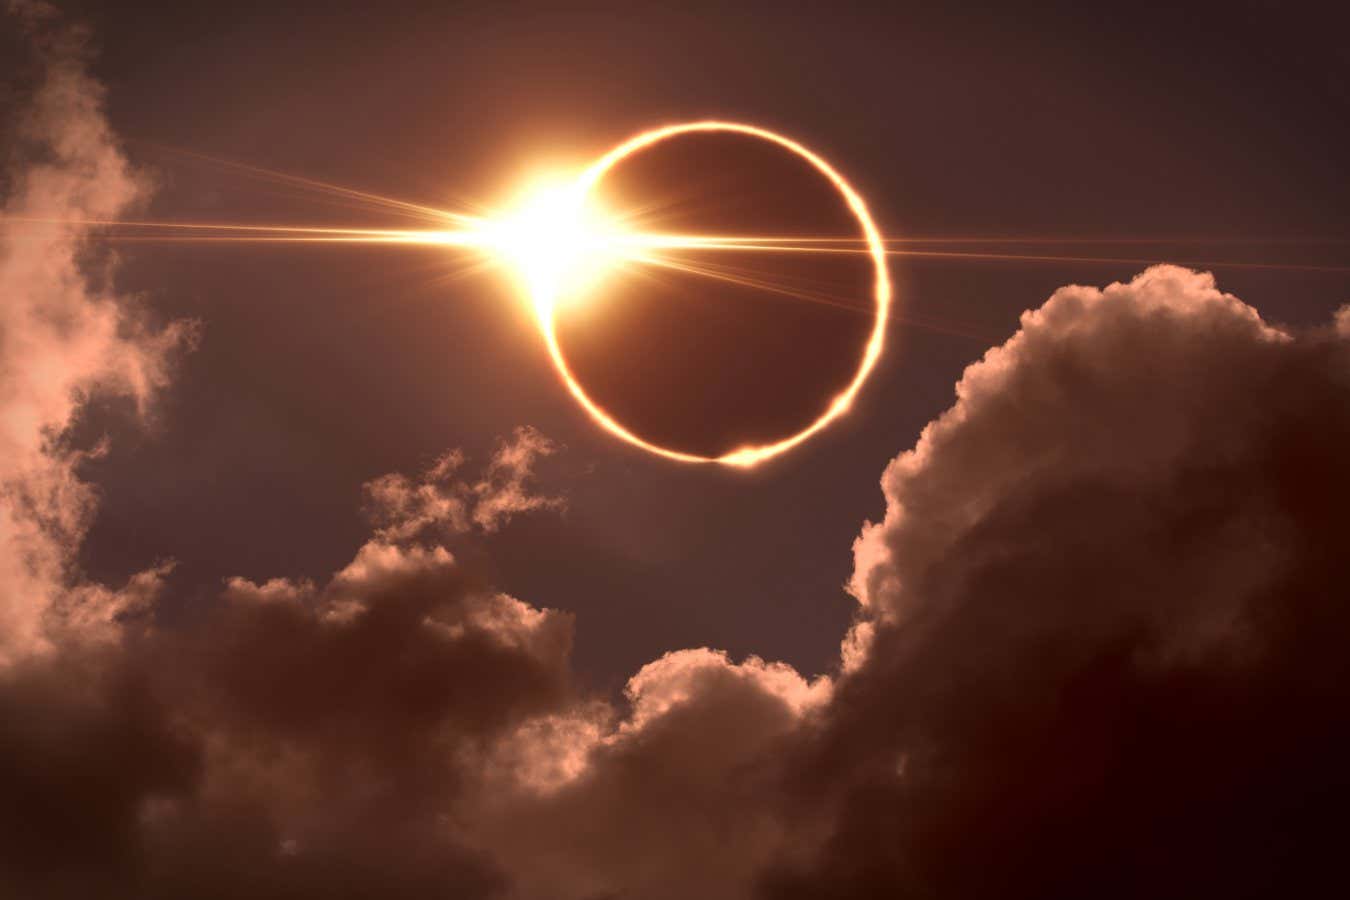 When is the next total solar eclipse visible from the UK?